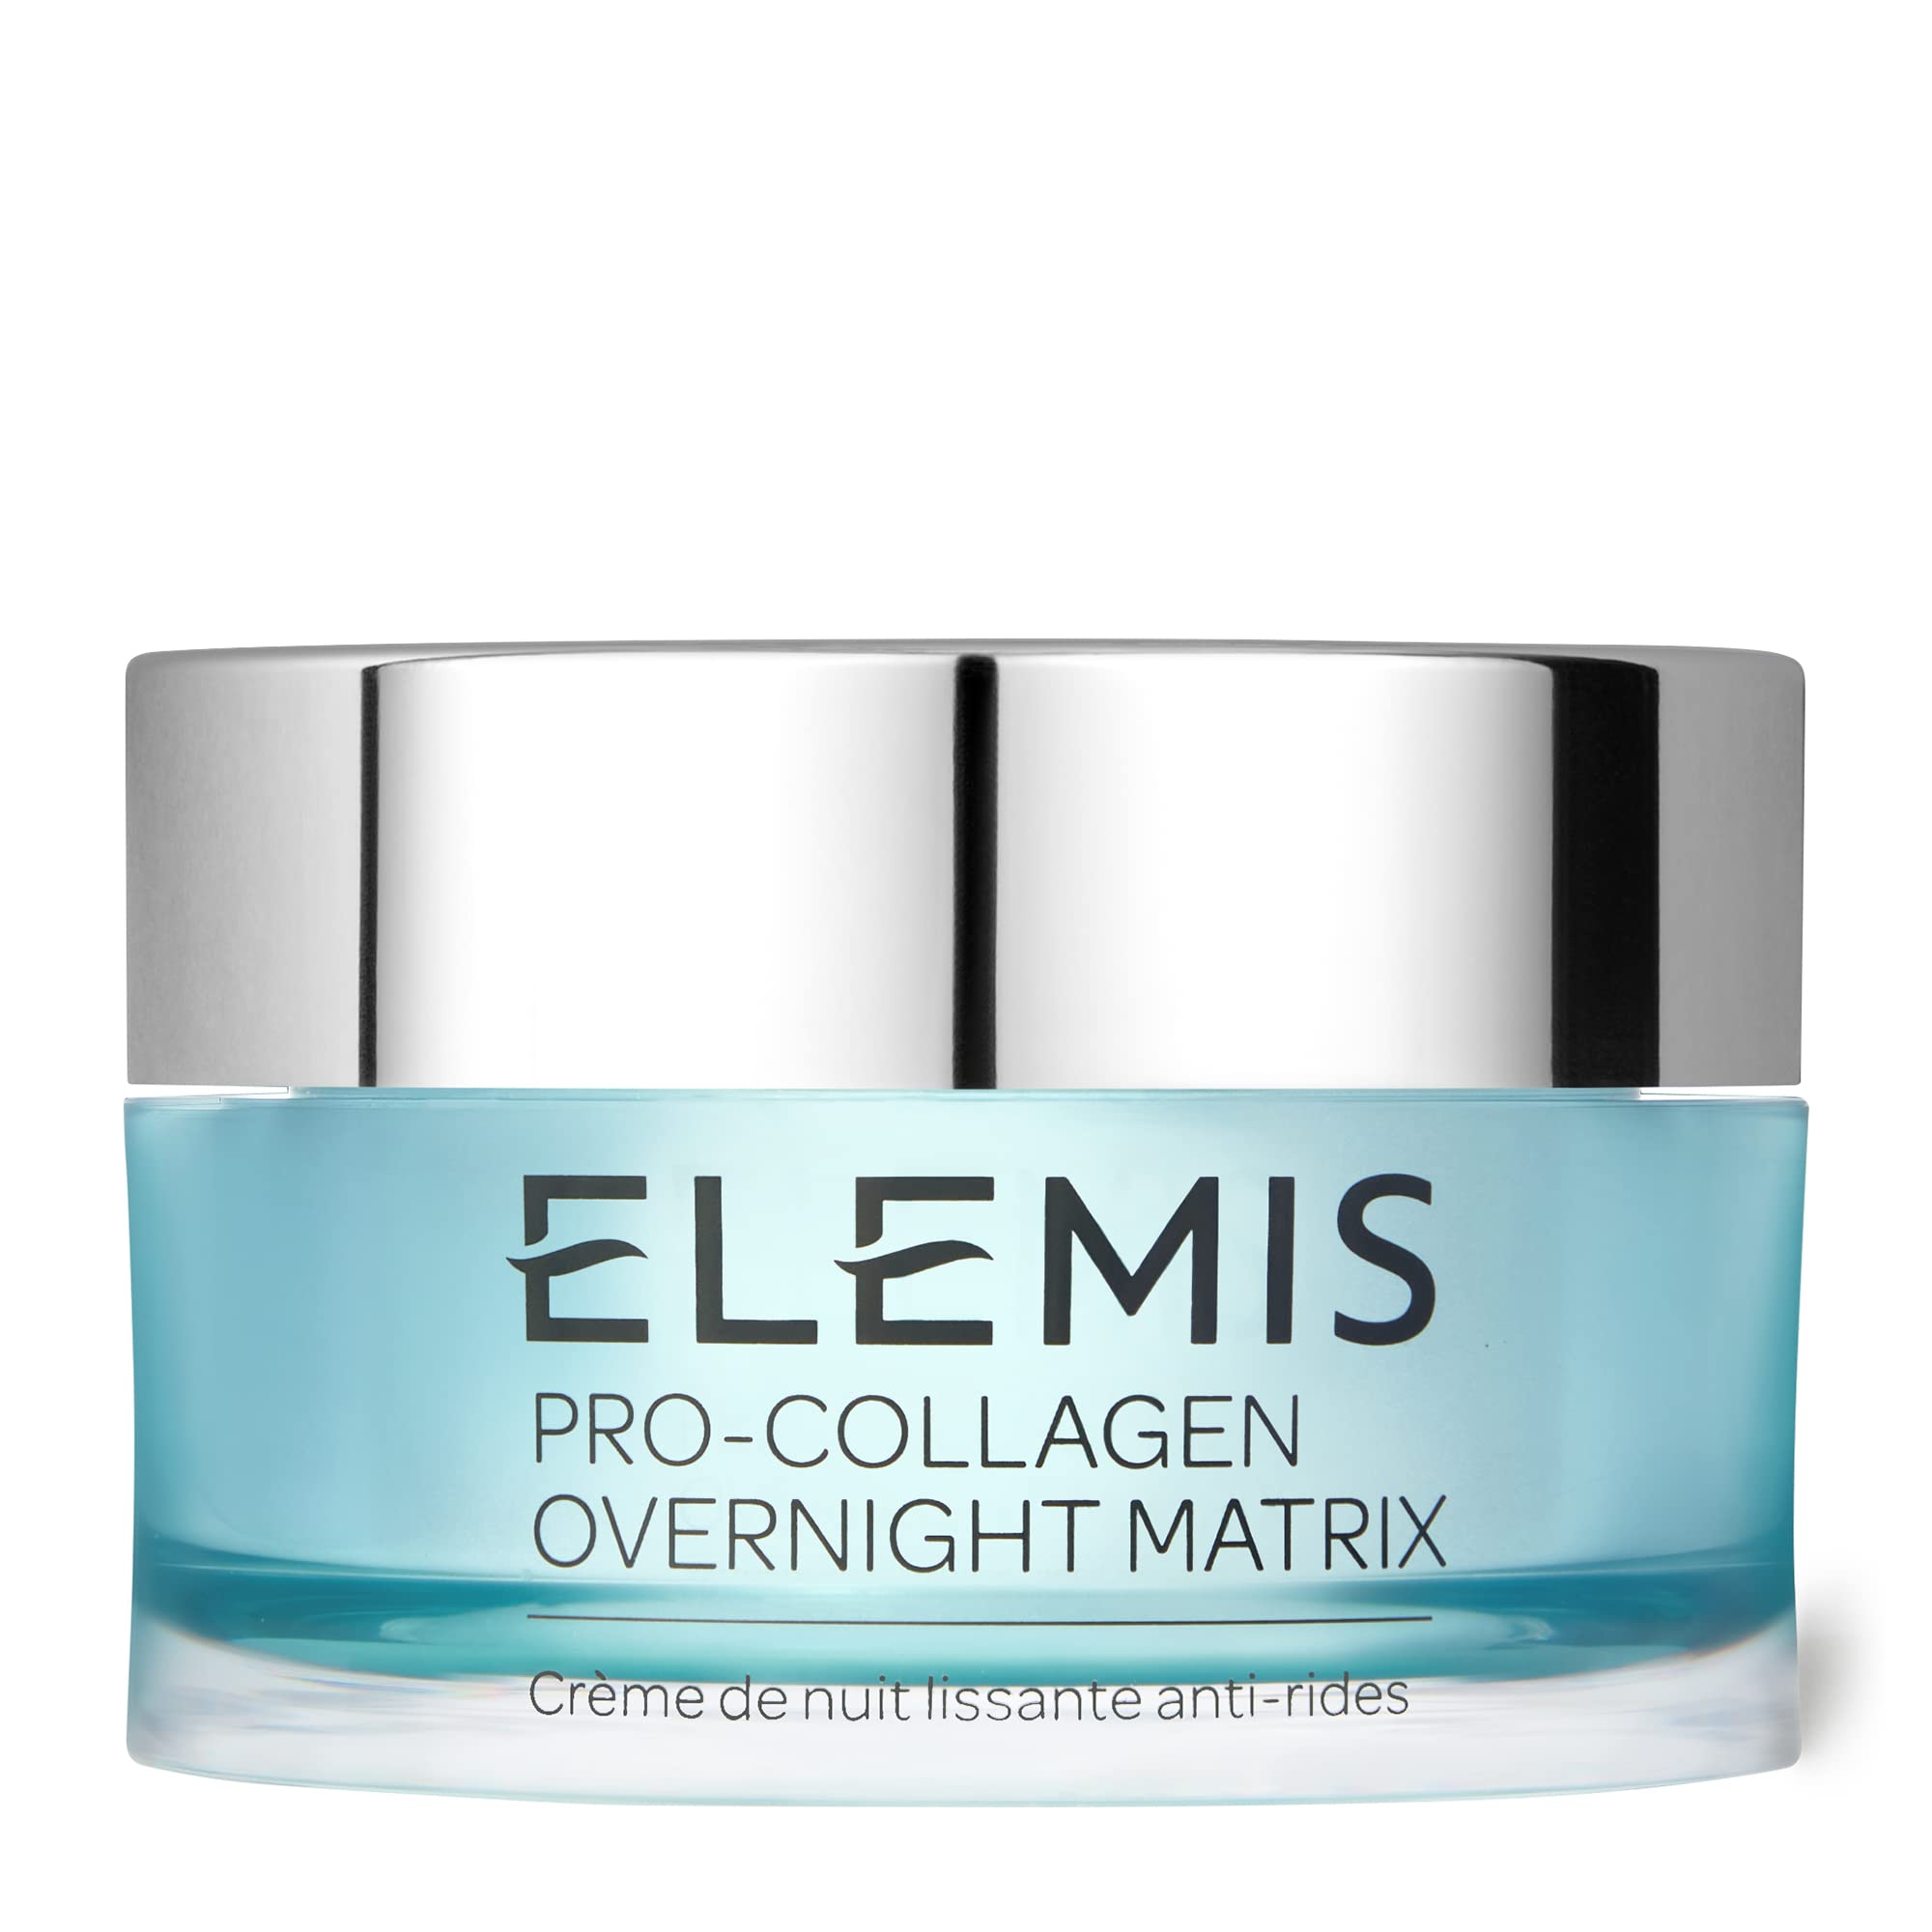 ELEMIS Pro-Collagen Overnight Matrix | Wrinkle Smoothing Night Cream Deeply Hydrates, Smoothes, Firms, and Replenishes Stressed-Looking Skin | 50 mL